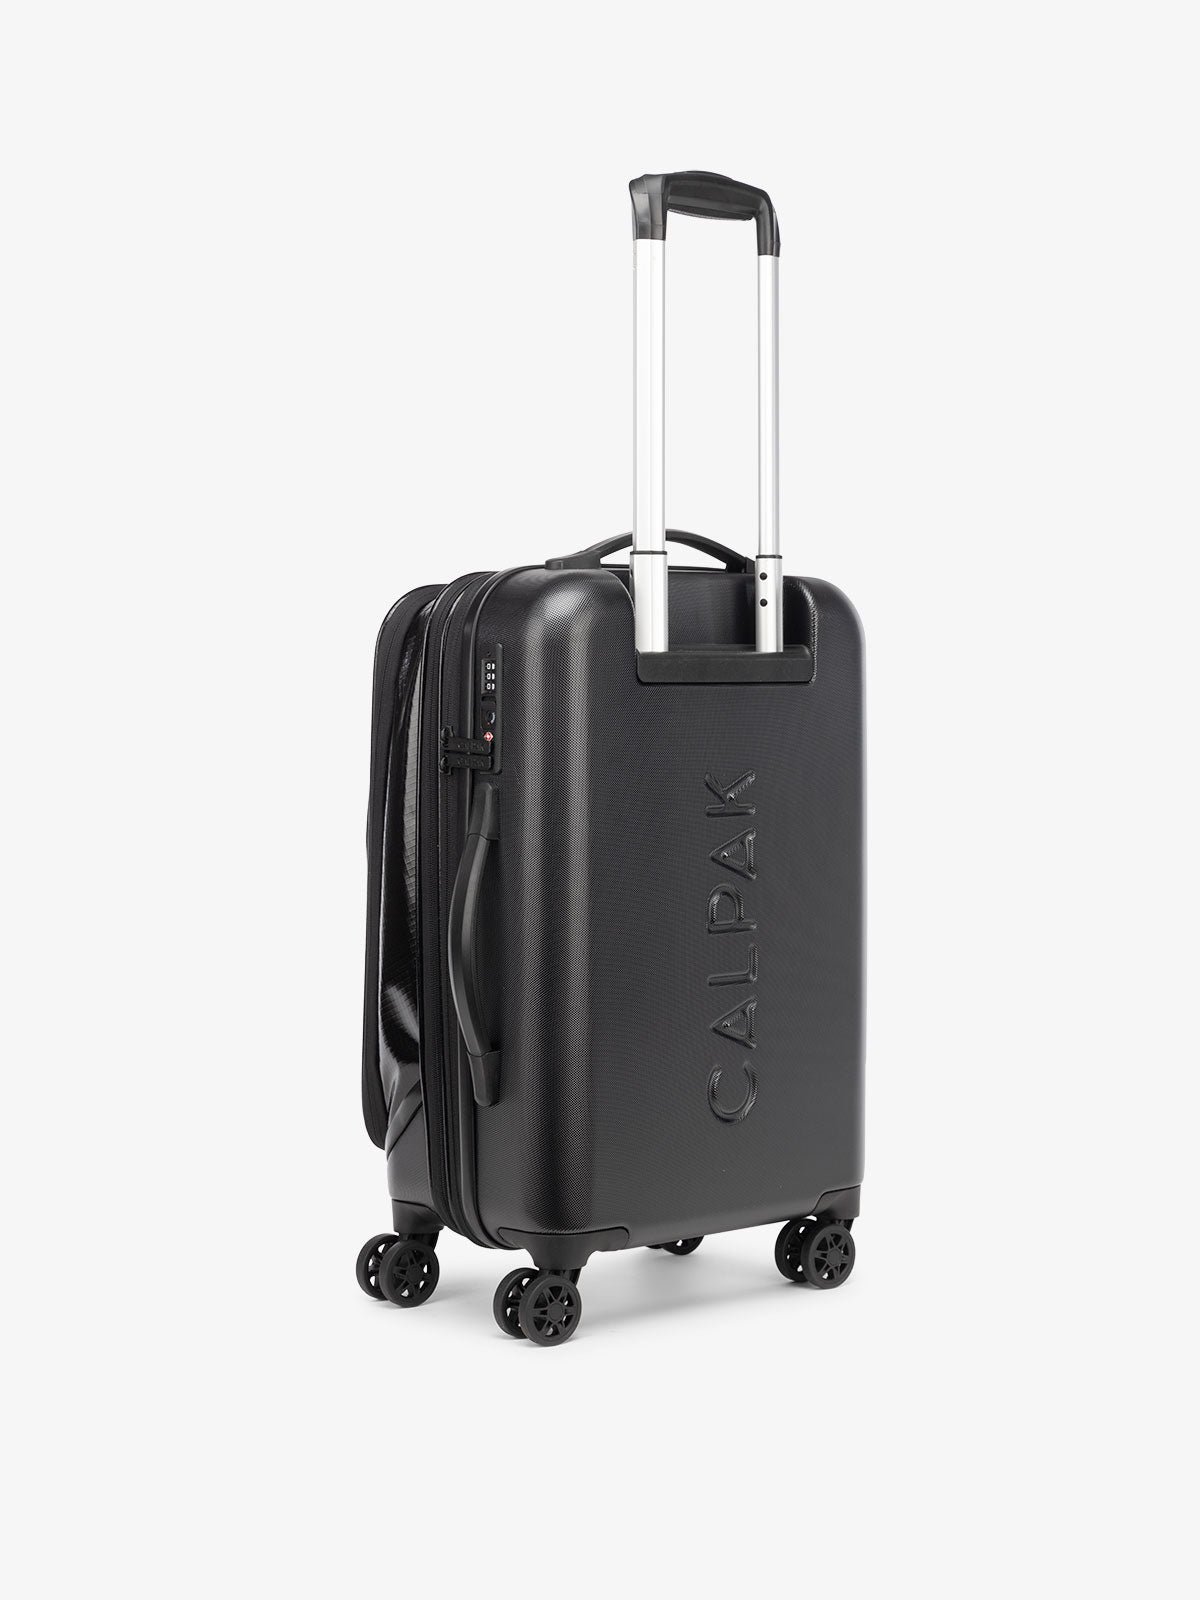 CALPAK Terra Carry-On Luggage hard shell back view with 360 spinner wheels and grab handles  in obsidian